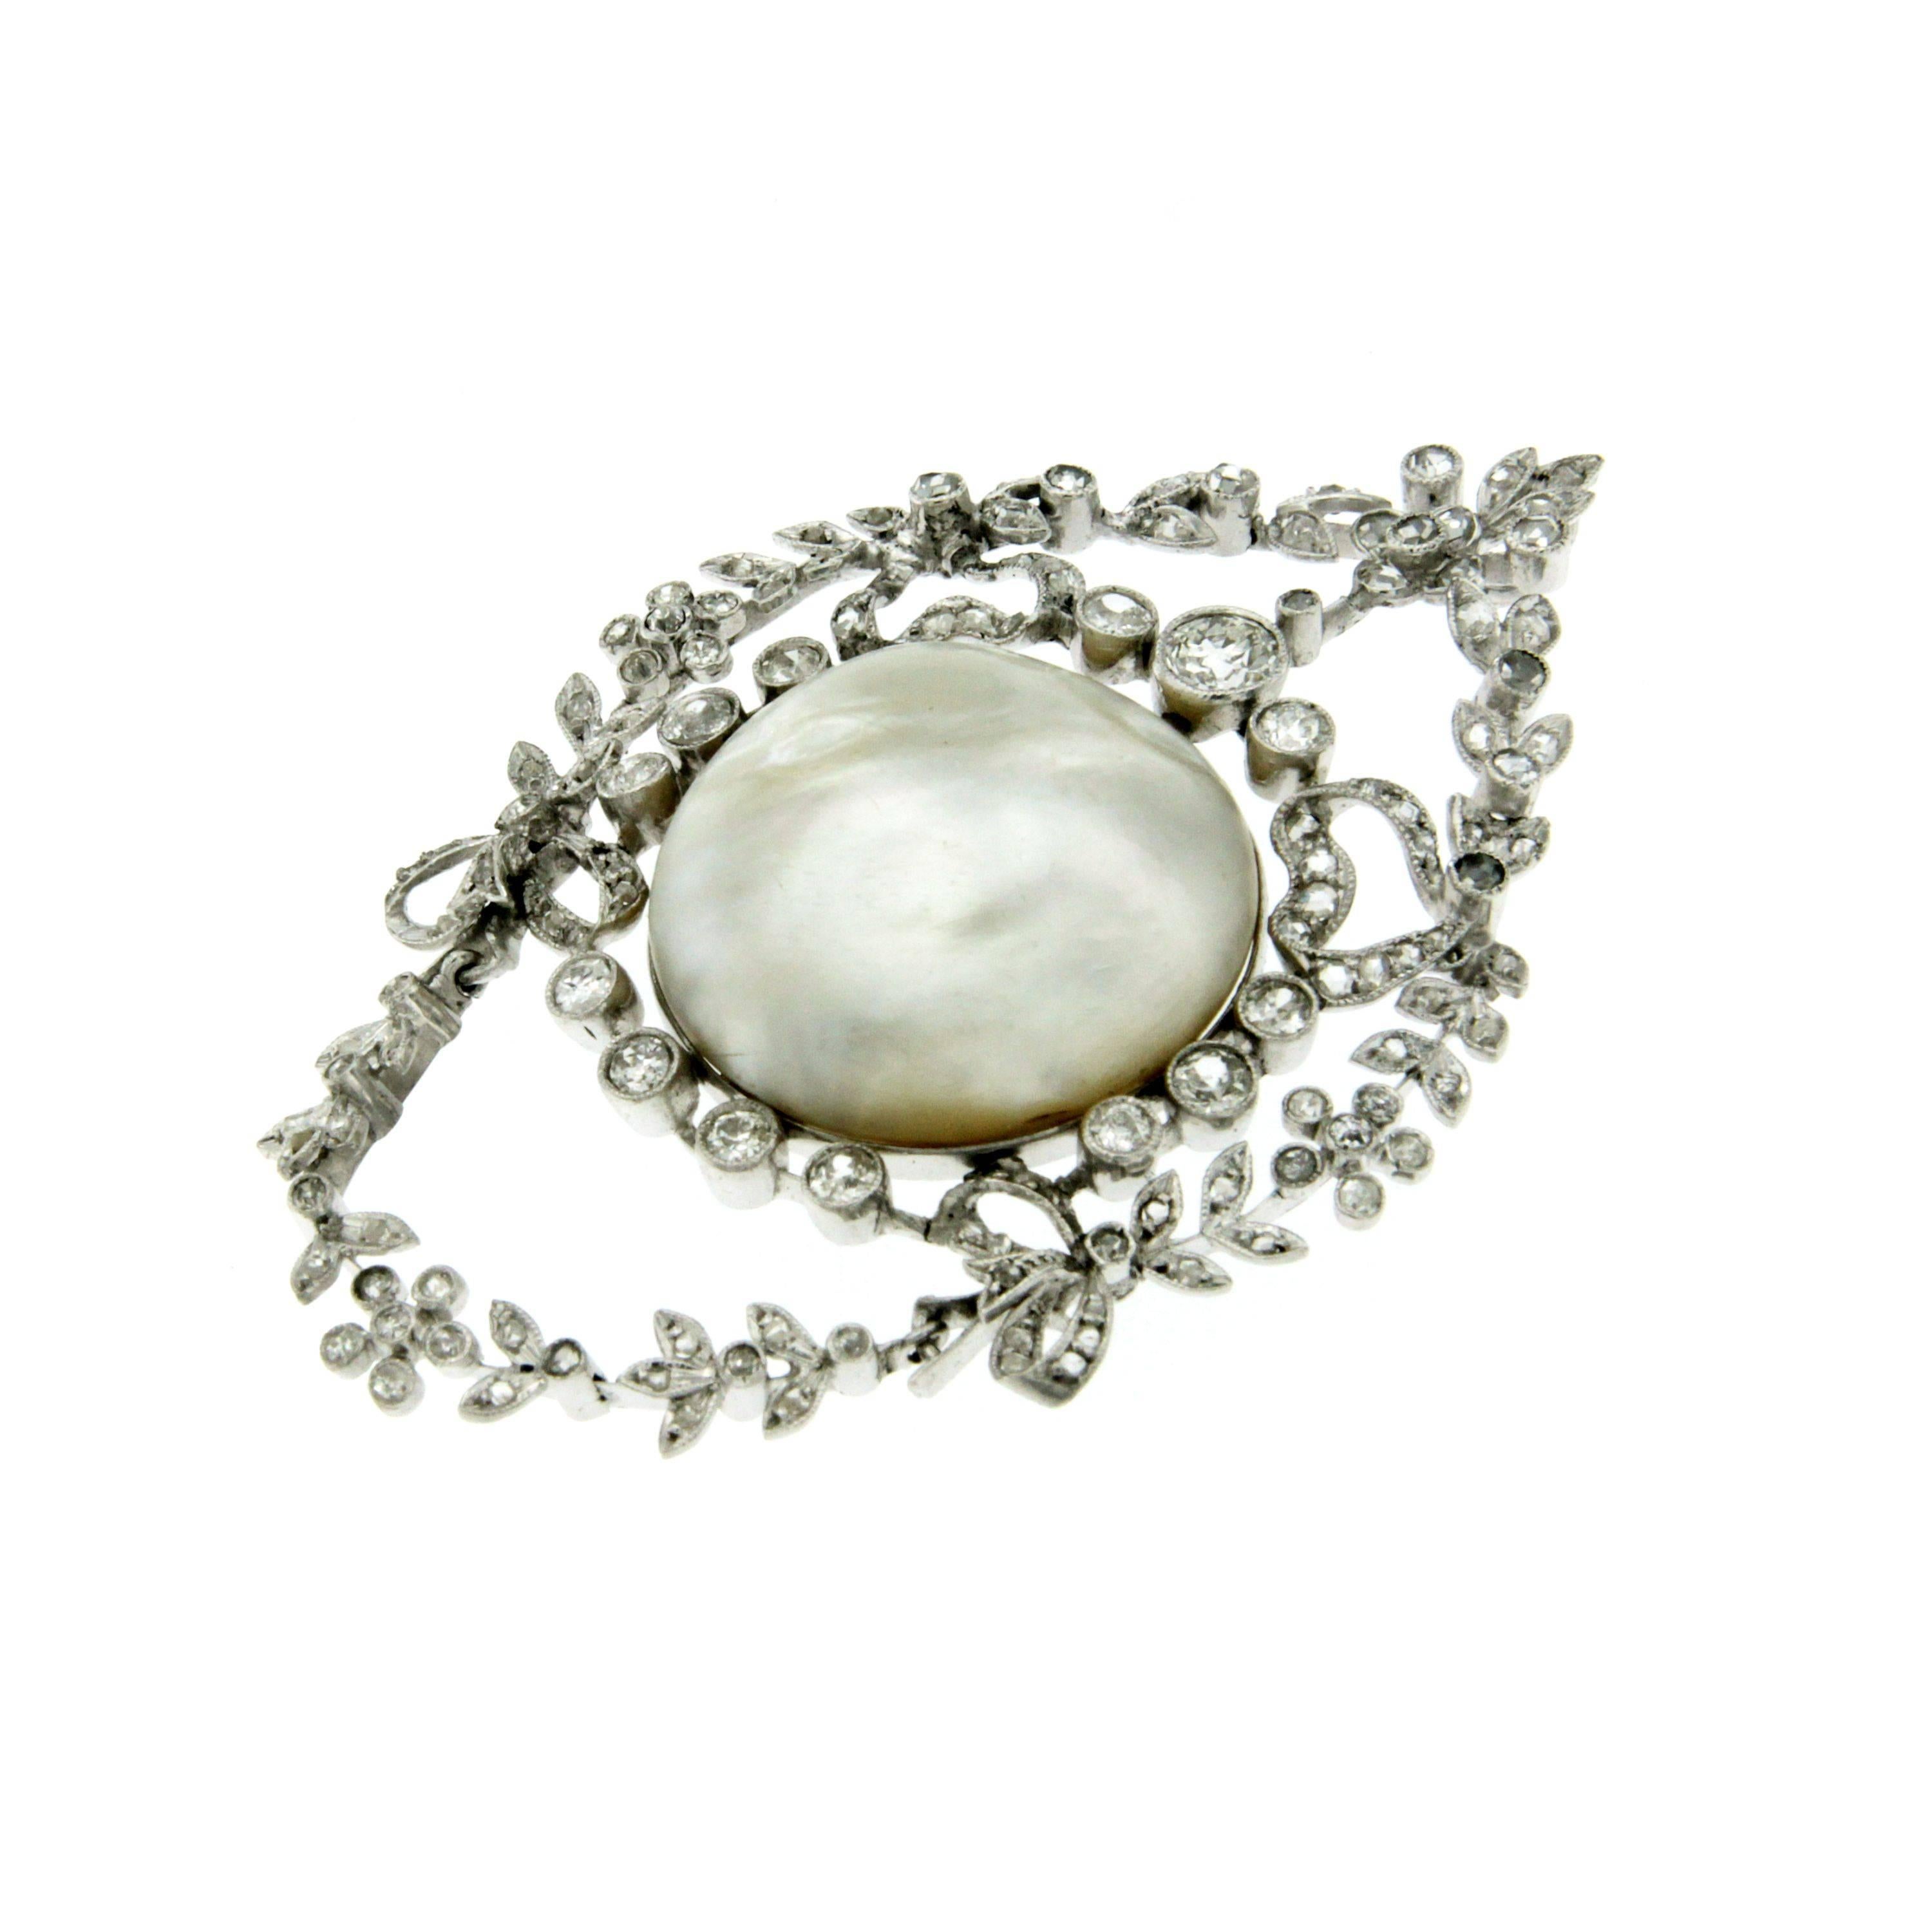 Beautiful and unique 18k white gold pendant, it features in the center a large and sparkling Natural Salt Water Certified Pearl of 28.10 carat in a diamond frame with a laurel wreath, flowers and bows motif.
Diamonds weigh all together approx. 2.50